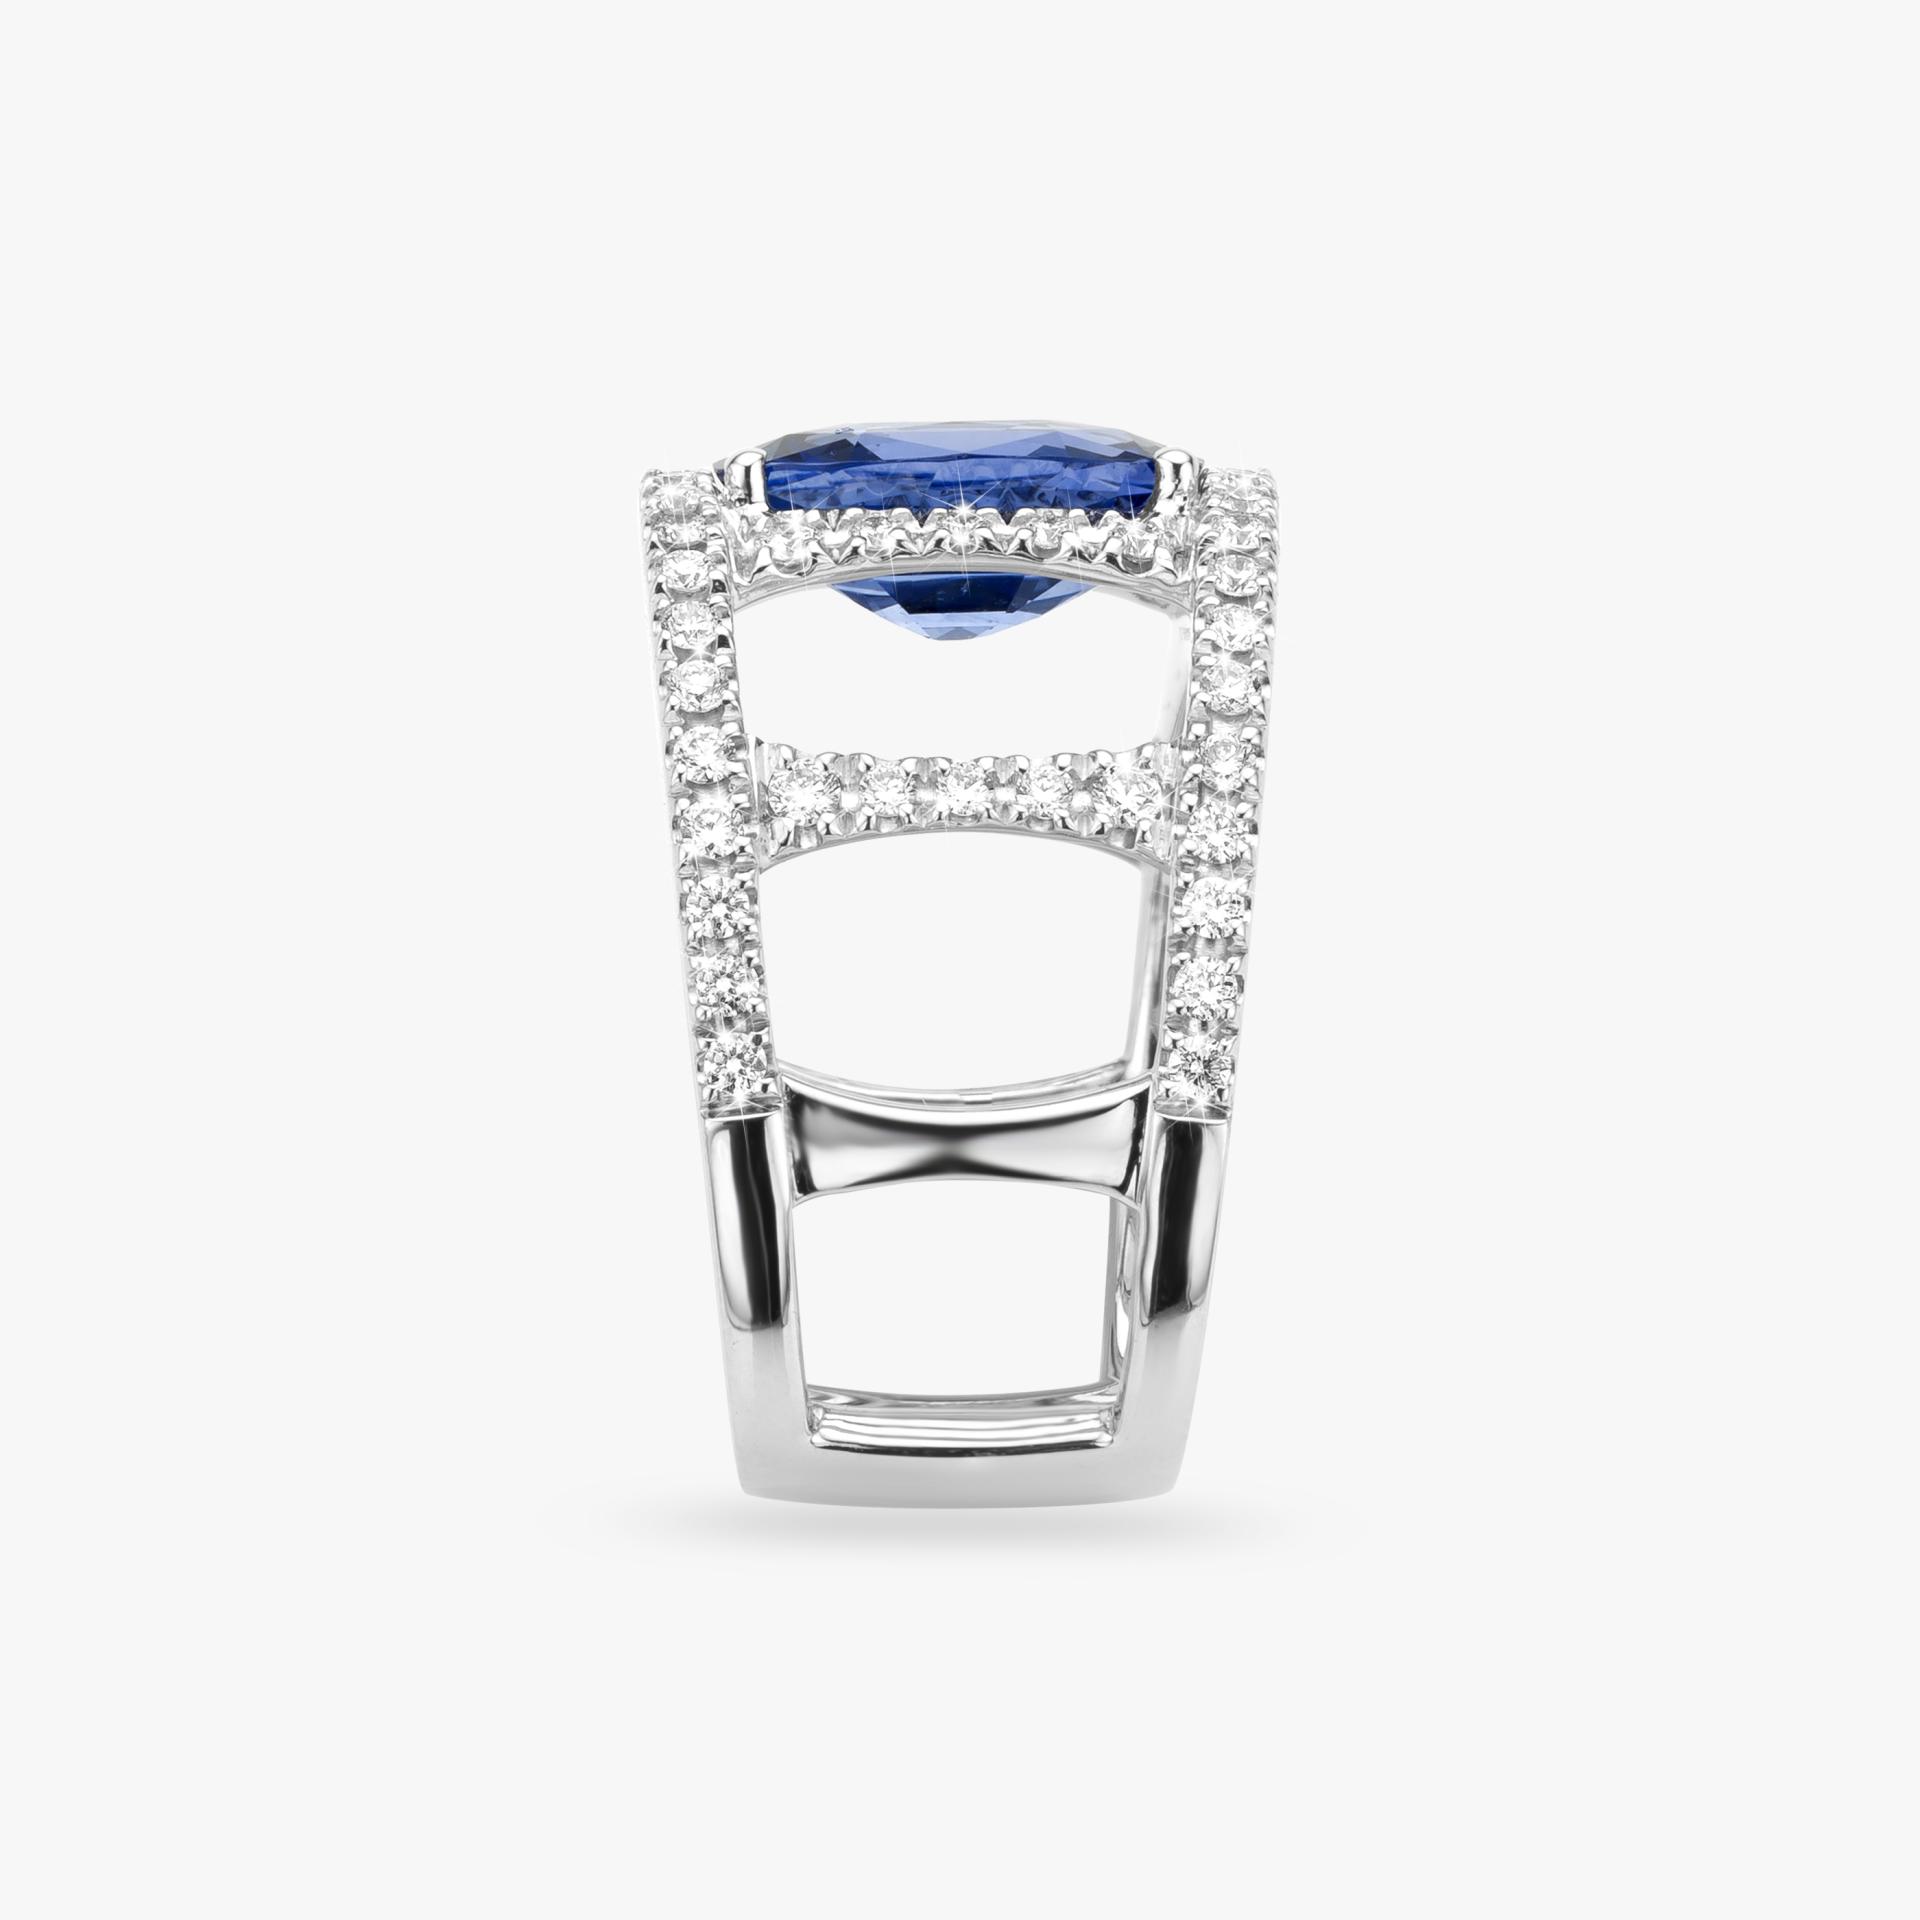 White gold ring set with a blue Ceylon sapphire and brilliant cut diamonds made by Maison De Greef